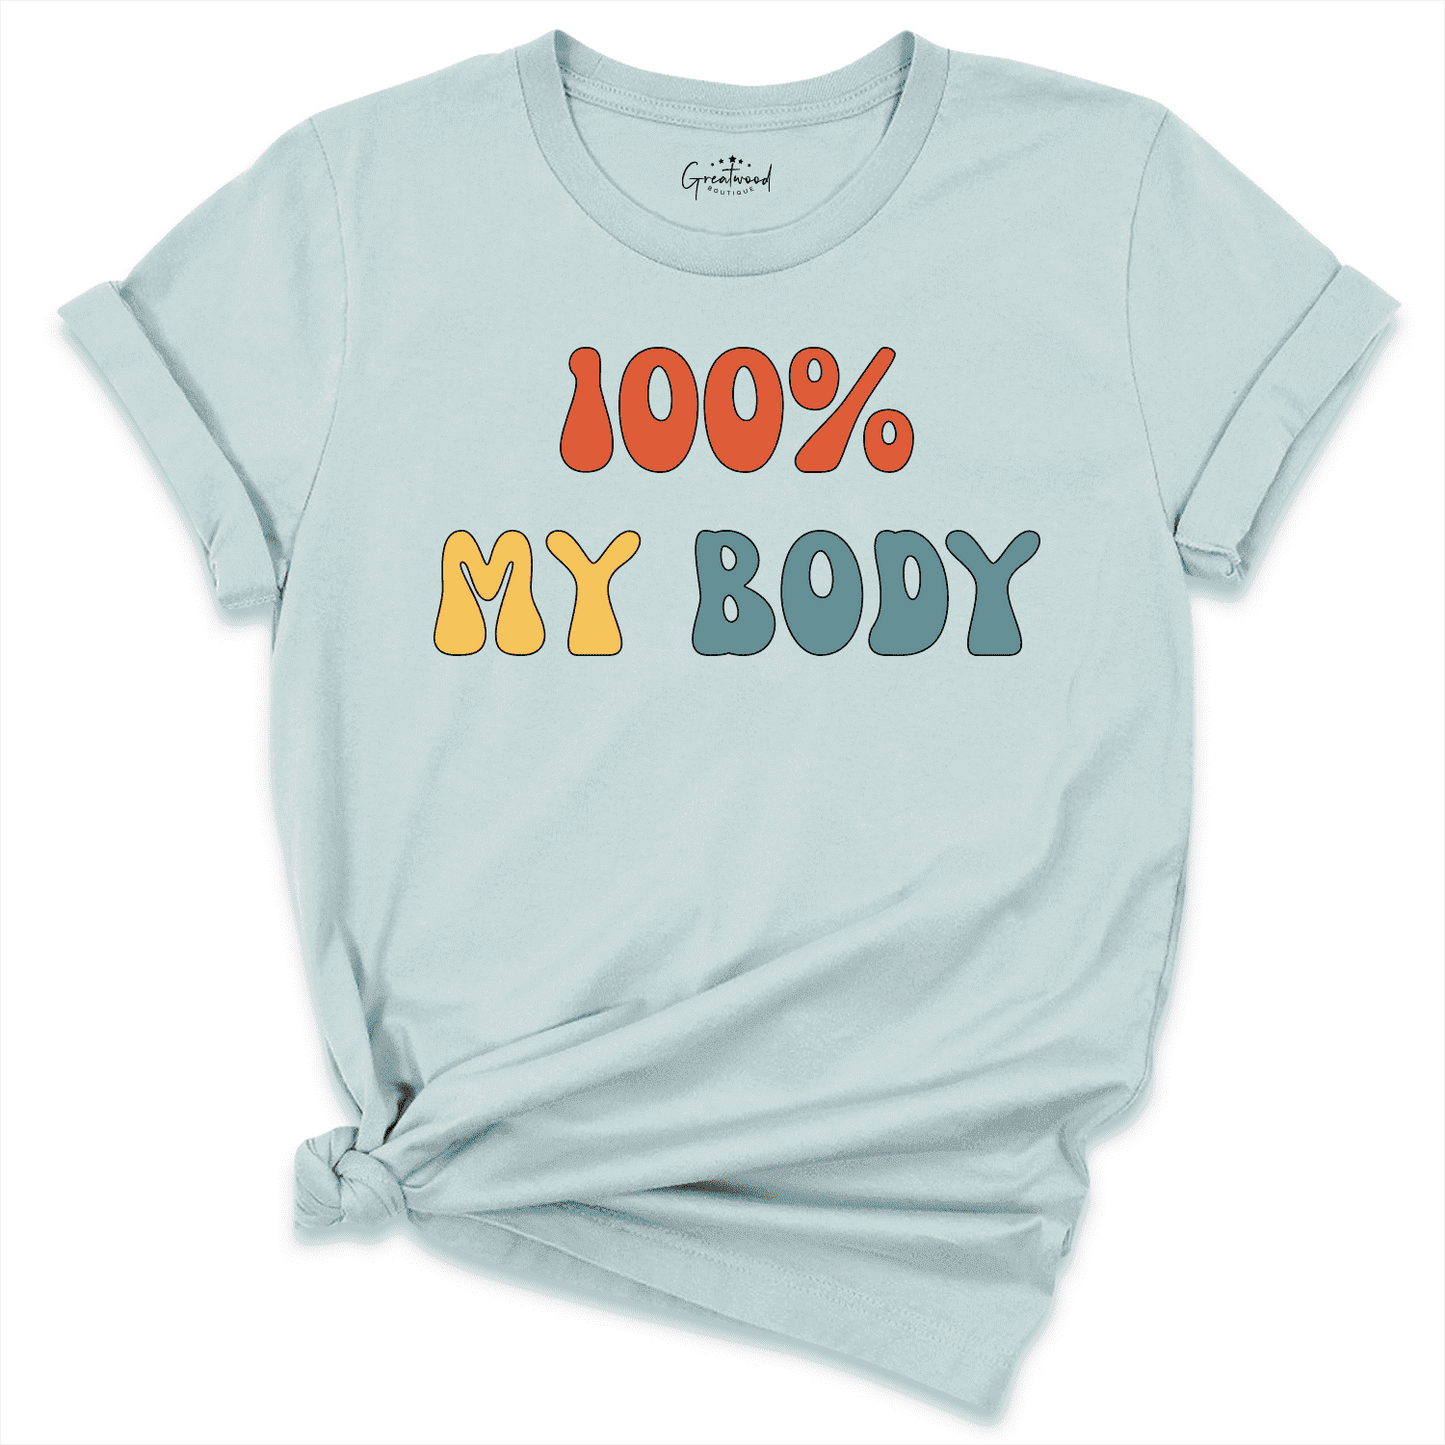 100% My Body Shirt Blue - Greatwood Boutique